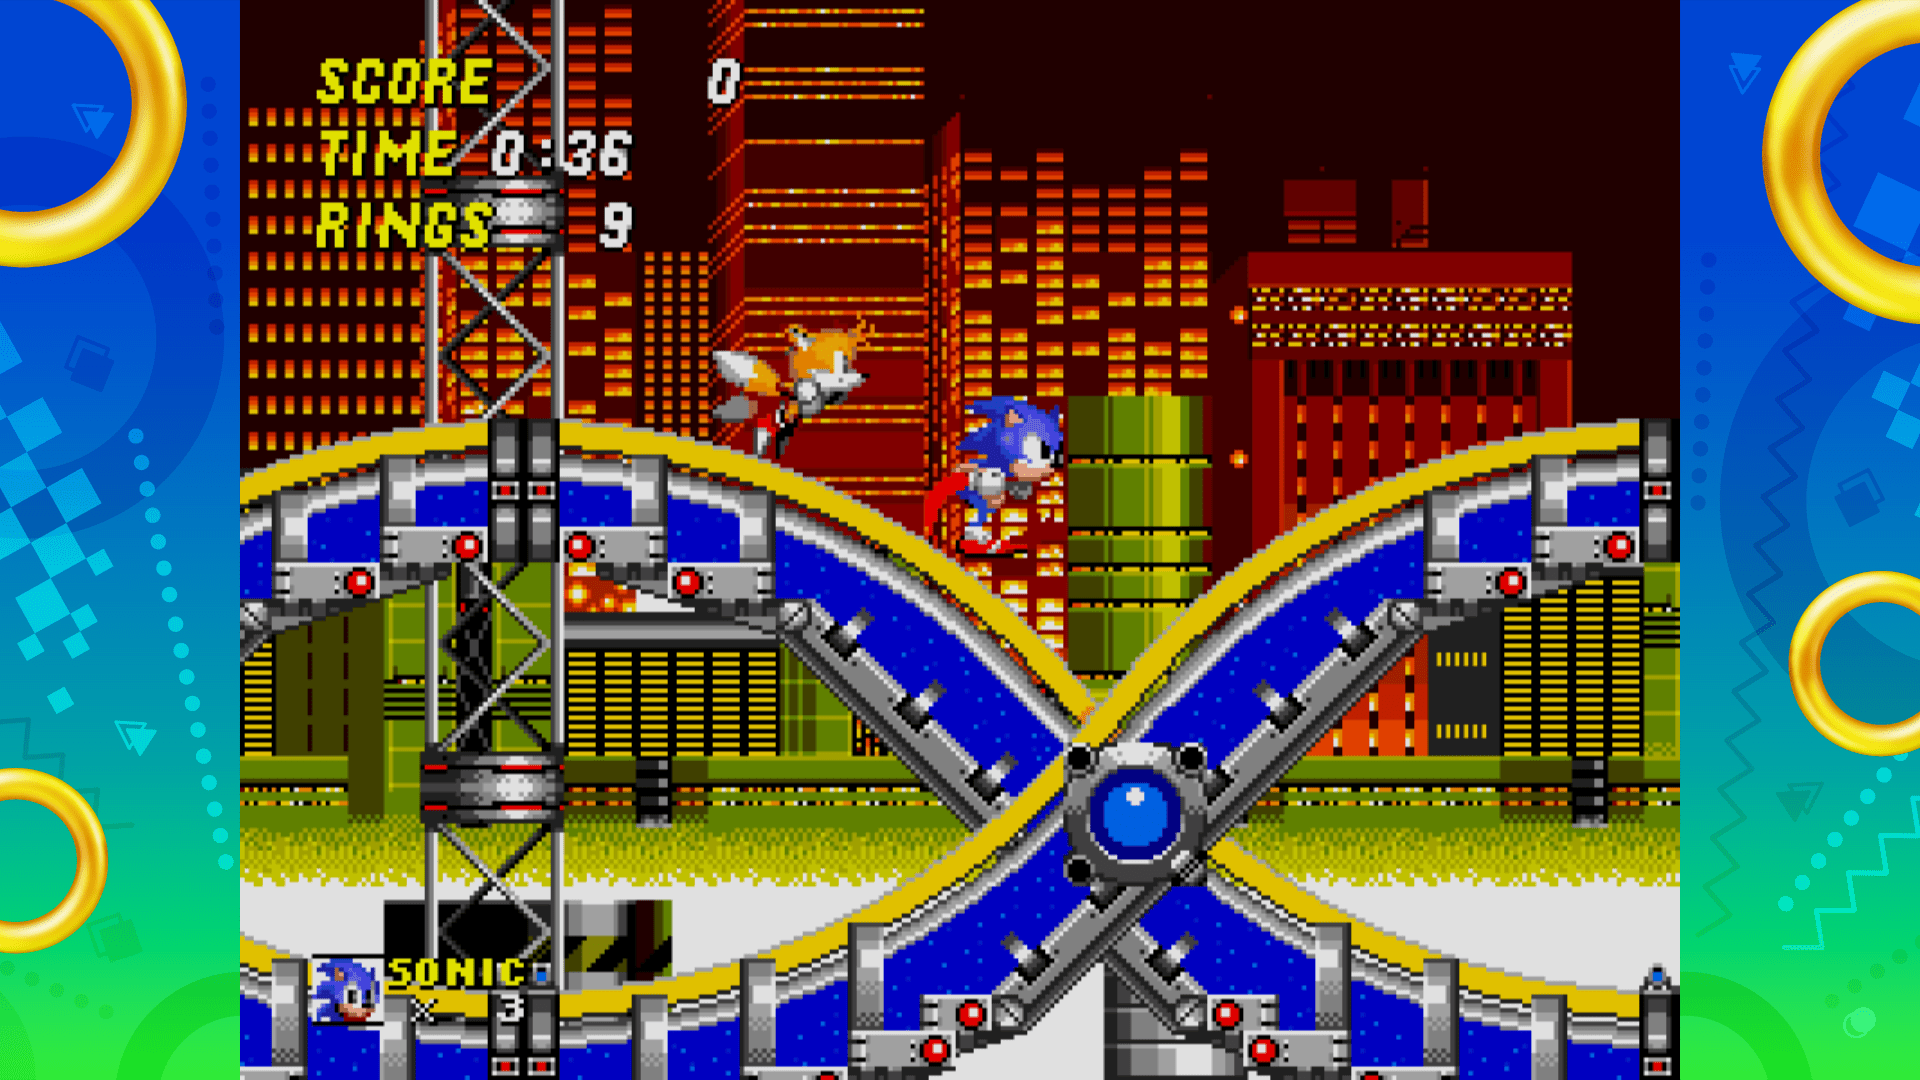 Sonic Origins' brings four remastered games to console and PC on June 23rd